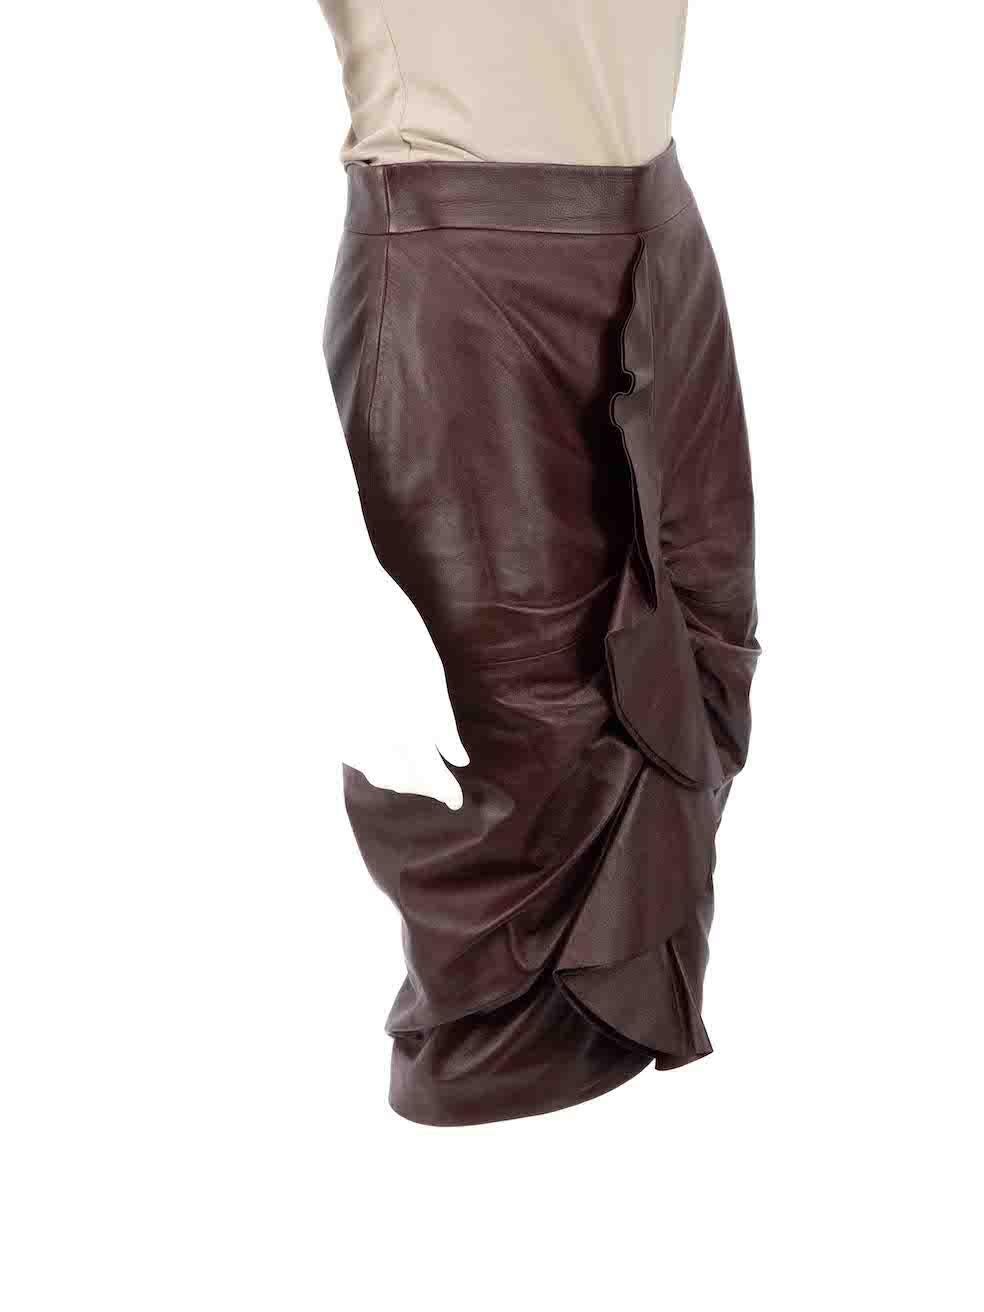 CONDITION is Very good. Hardly any visible wear to skirt is evident on this used Givenchy designer resale item.
 
 
 
 Details
 
 
 Brown
 
 Leather
 
 Pencil skirt
 
 Ruffle accent
 
 Side zip and hook fastening
 
 Knee length
 
 Figure hugging